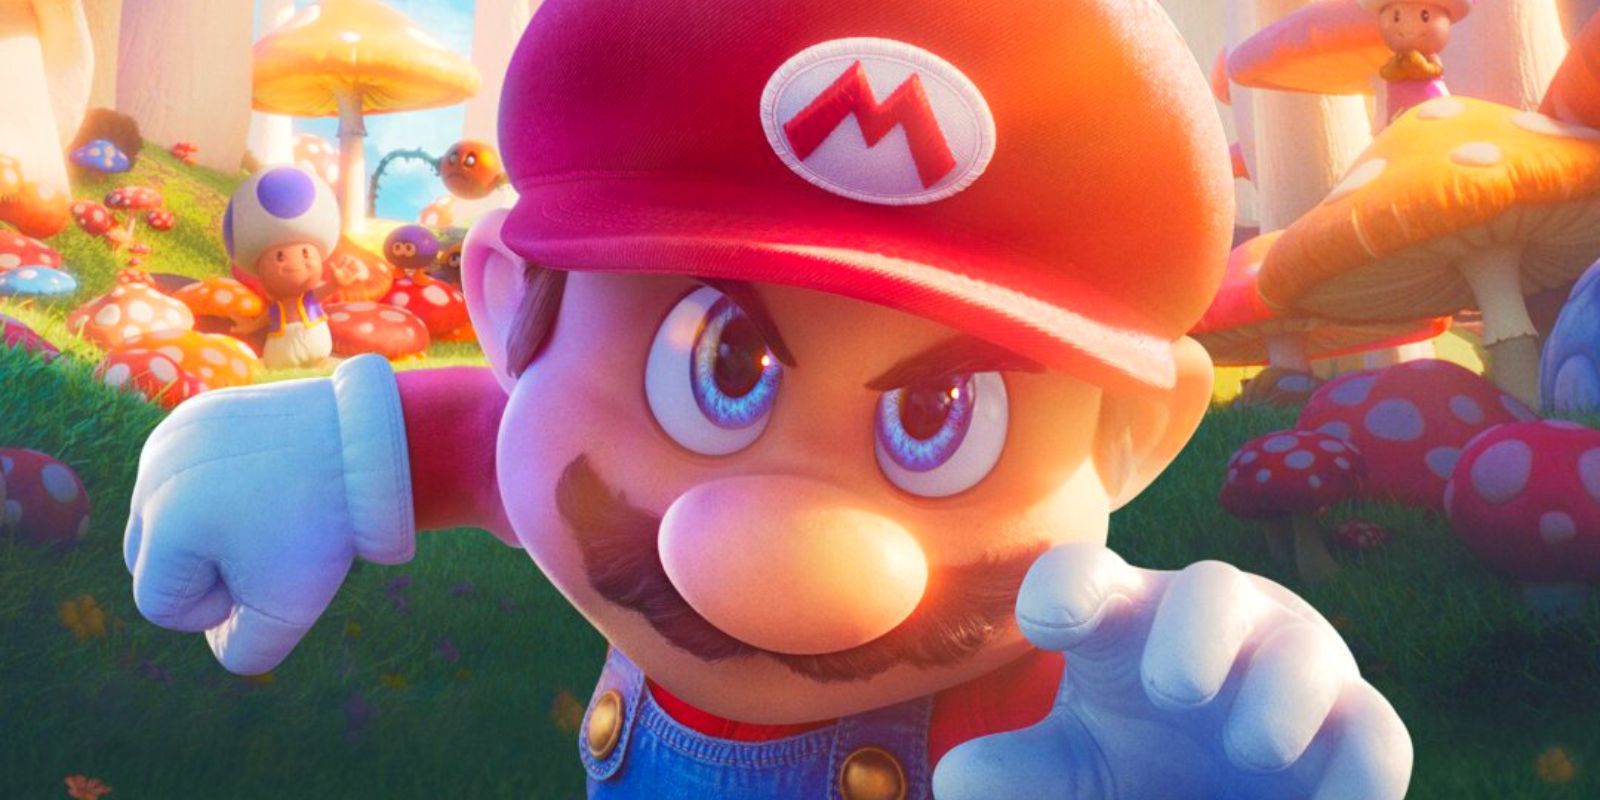 Mario with a clenched fist and a determined face rushing the camera